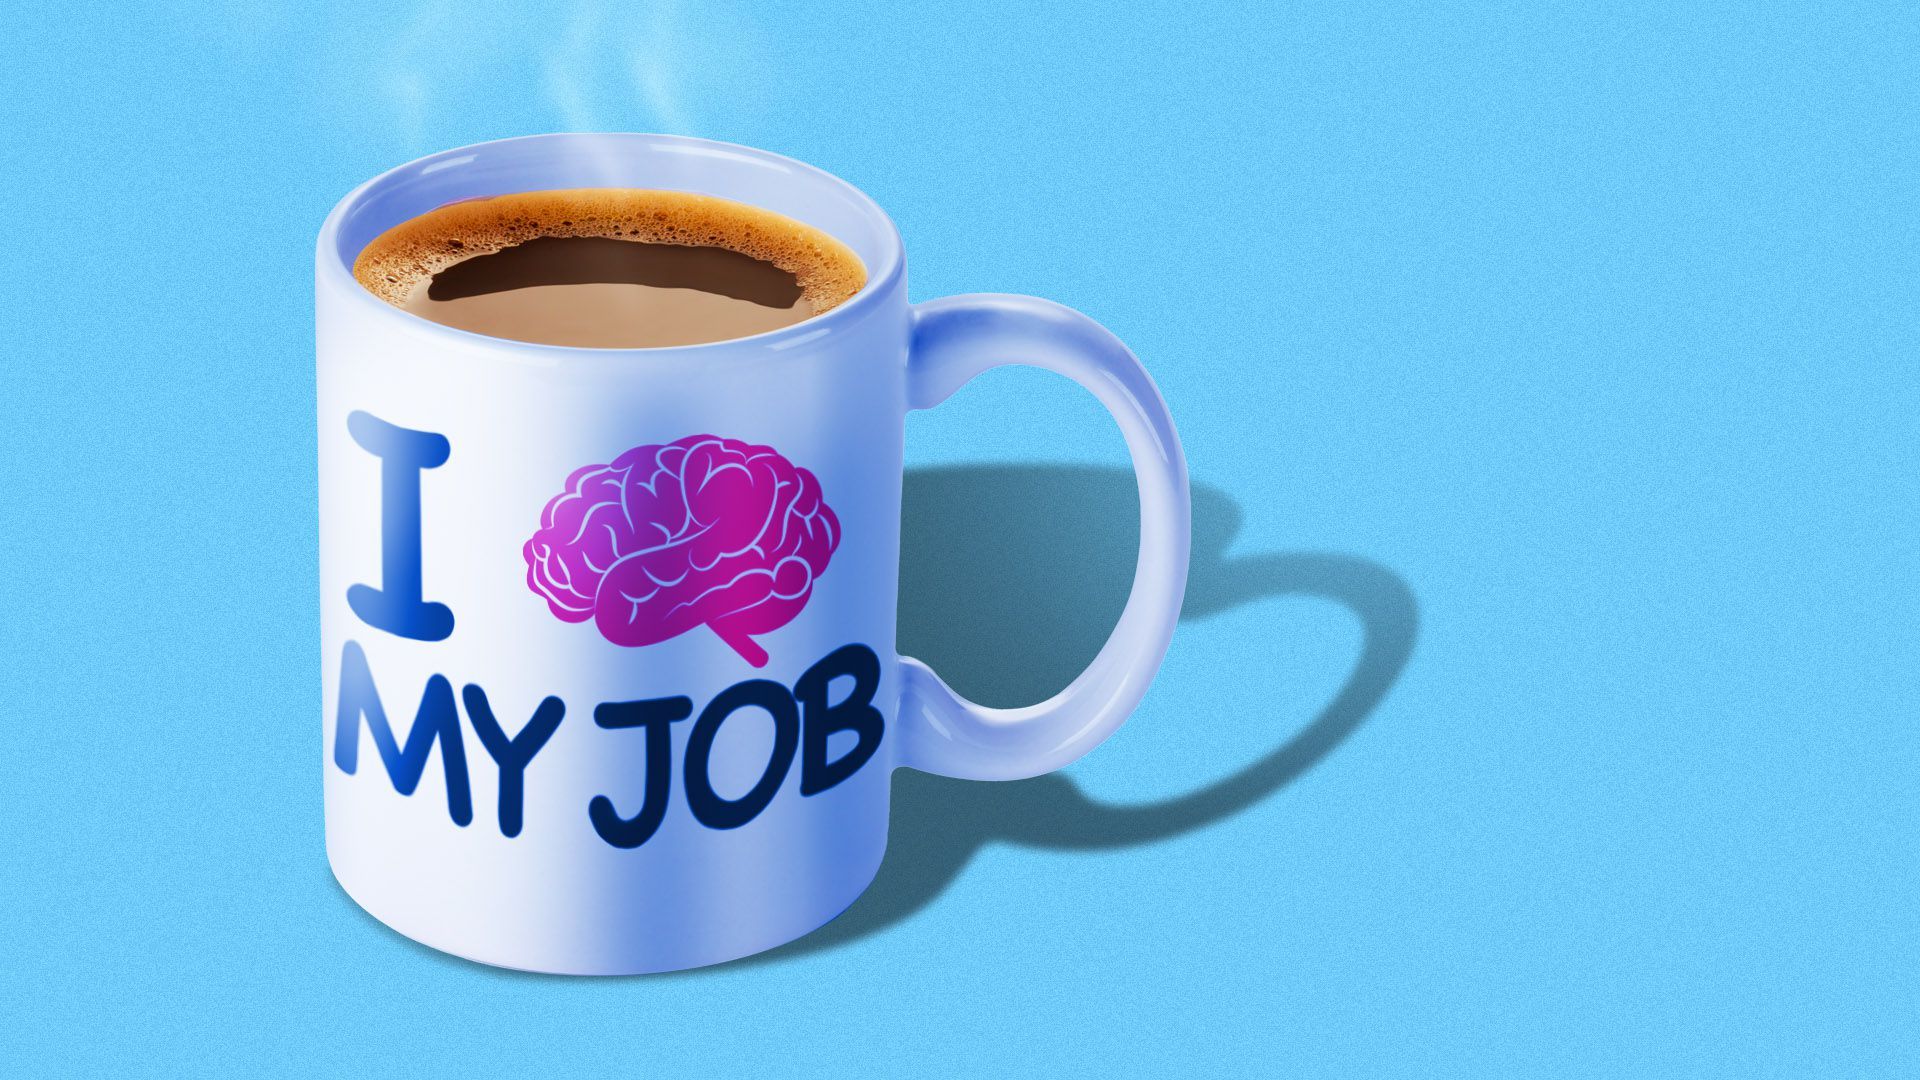 Illustration of a coffee mug that reads "I love my job" with a brain in place of the heart